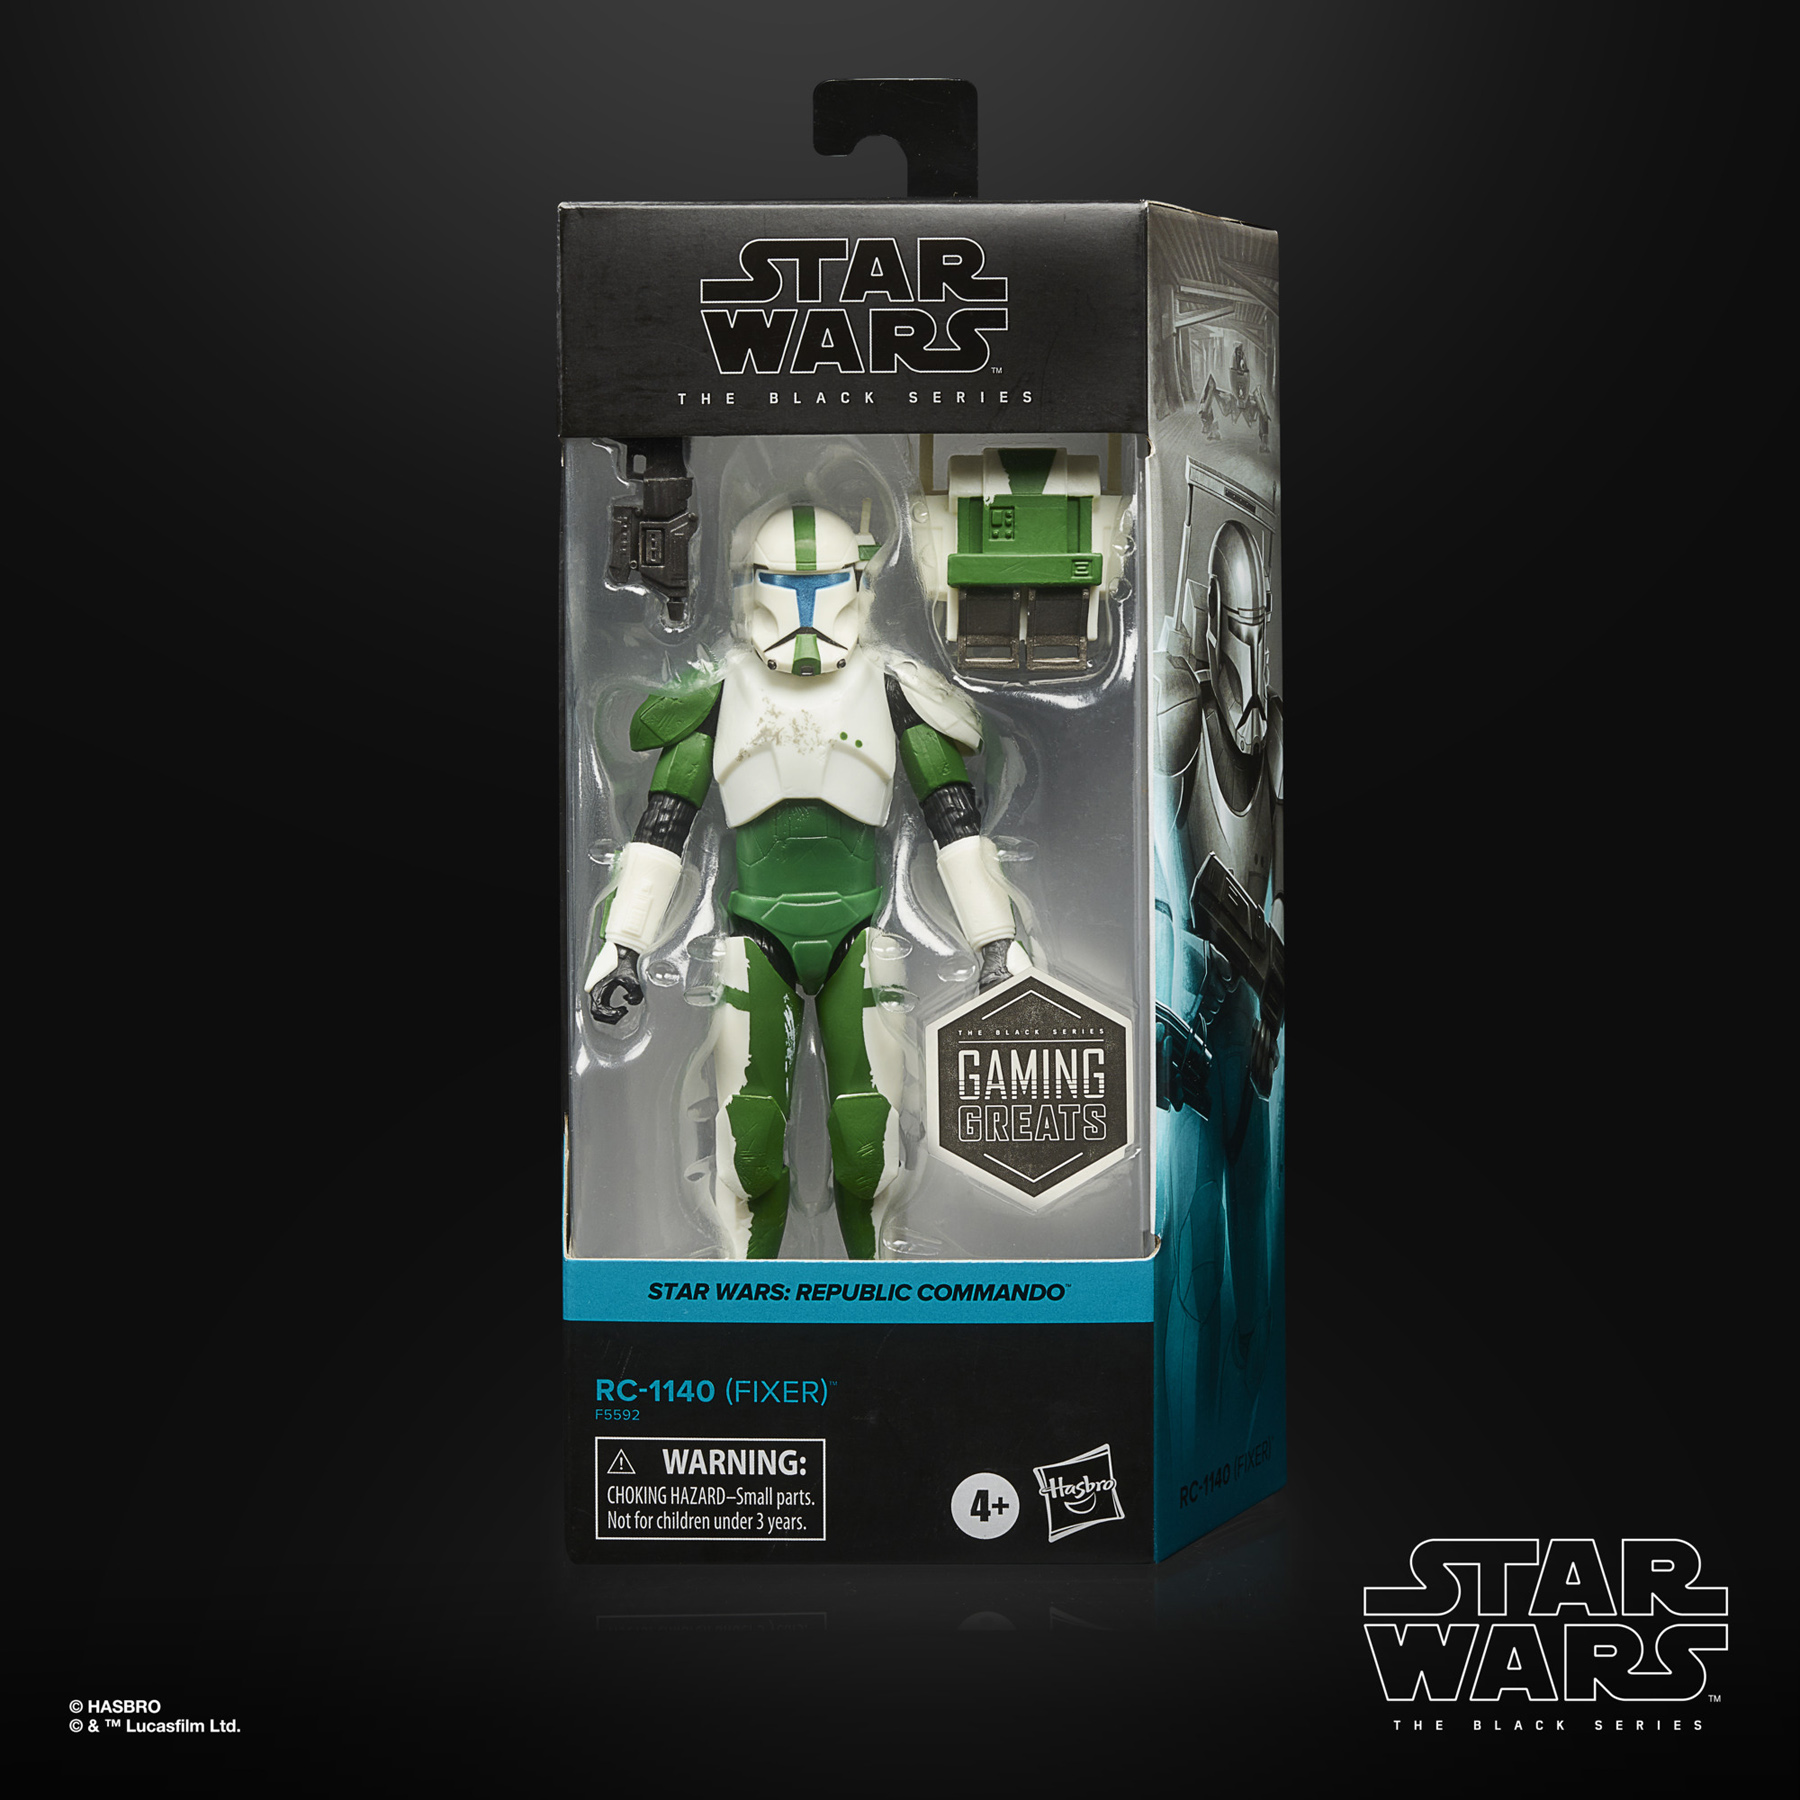 Star Wars The Black Series Gaming Greats RC-1140 (Fixer)  5010994182663 